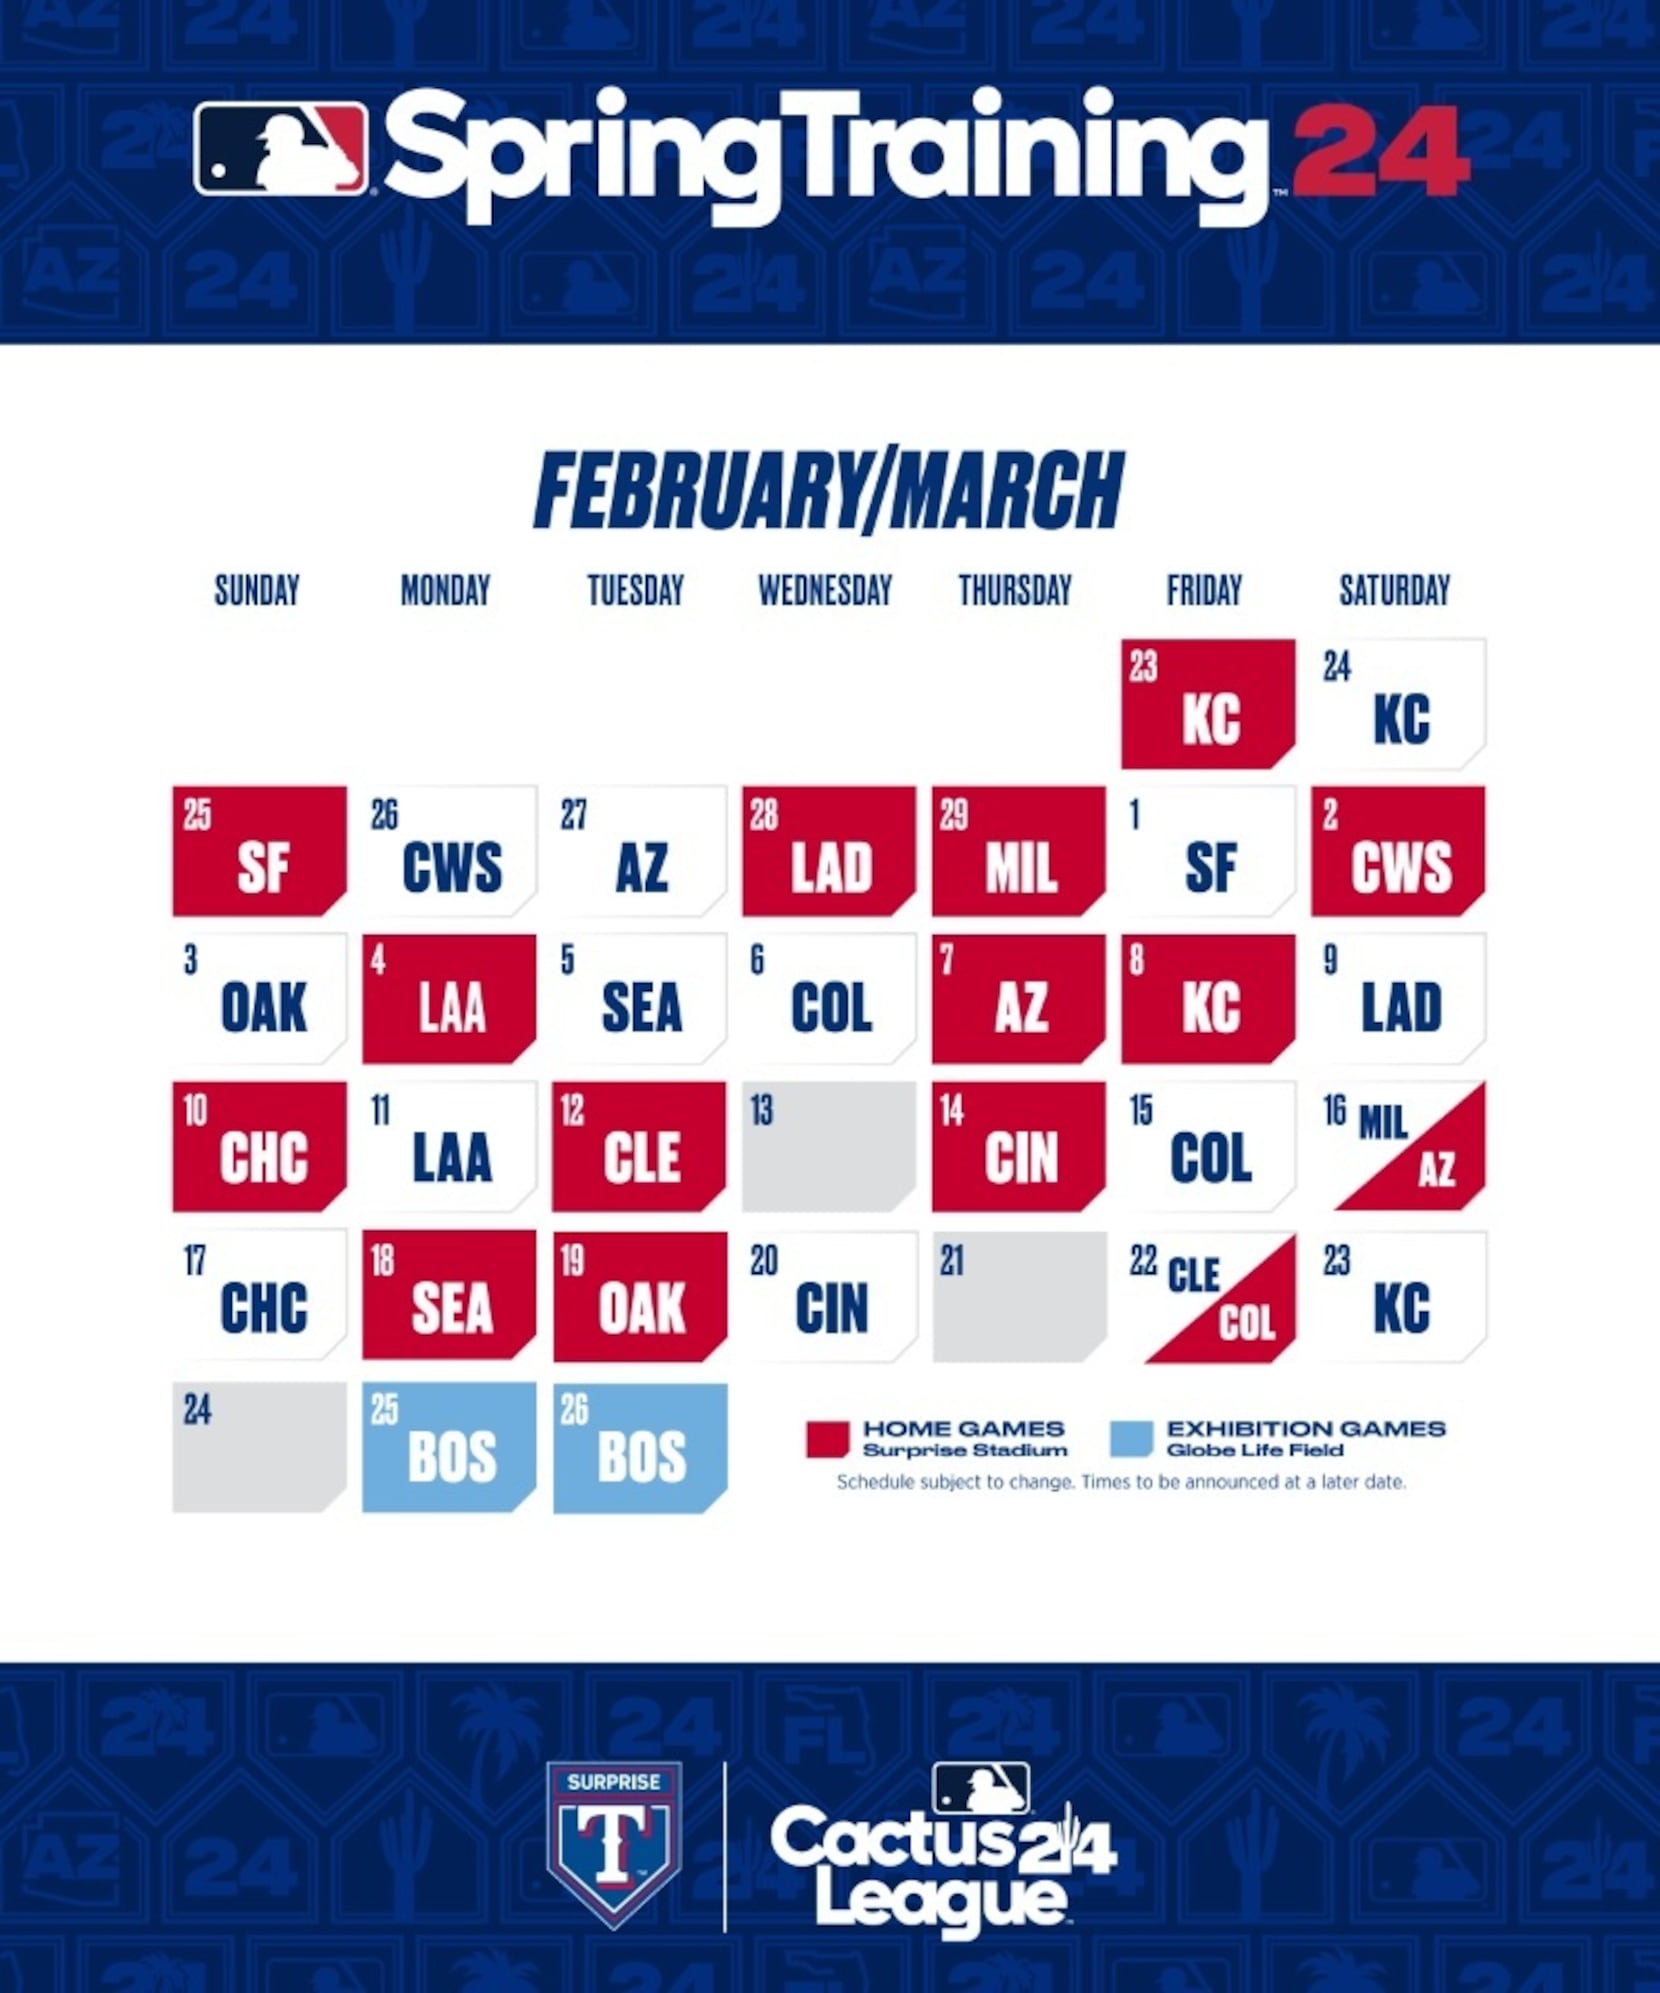 MLB releases 2018 Spring Training schedule